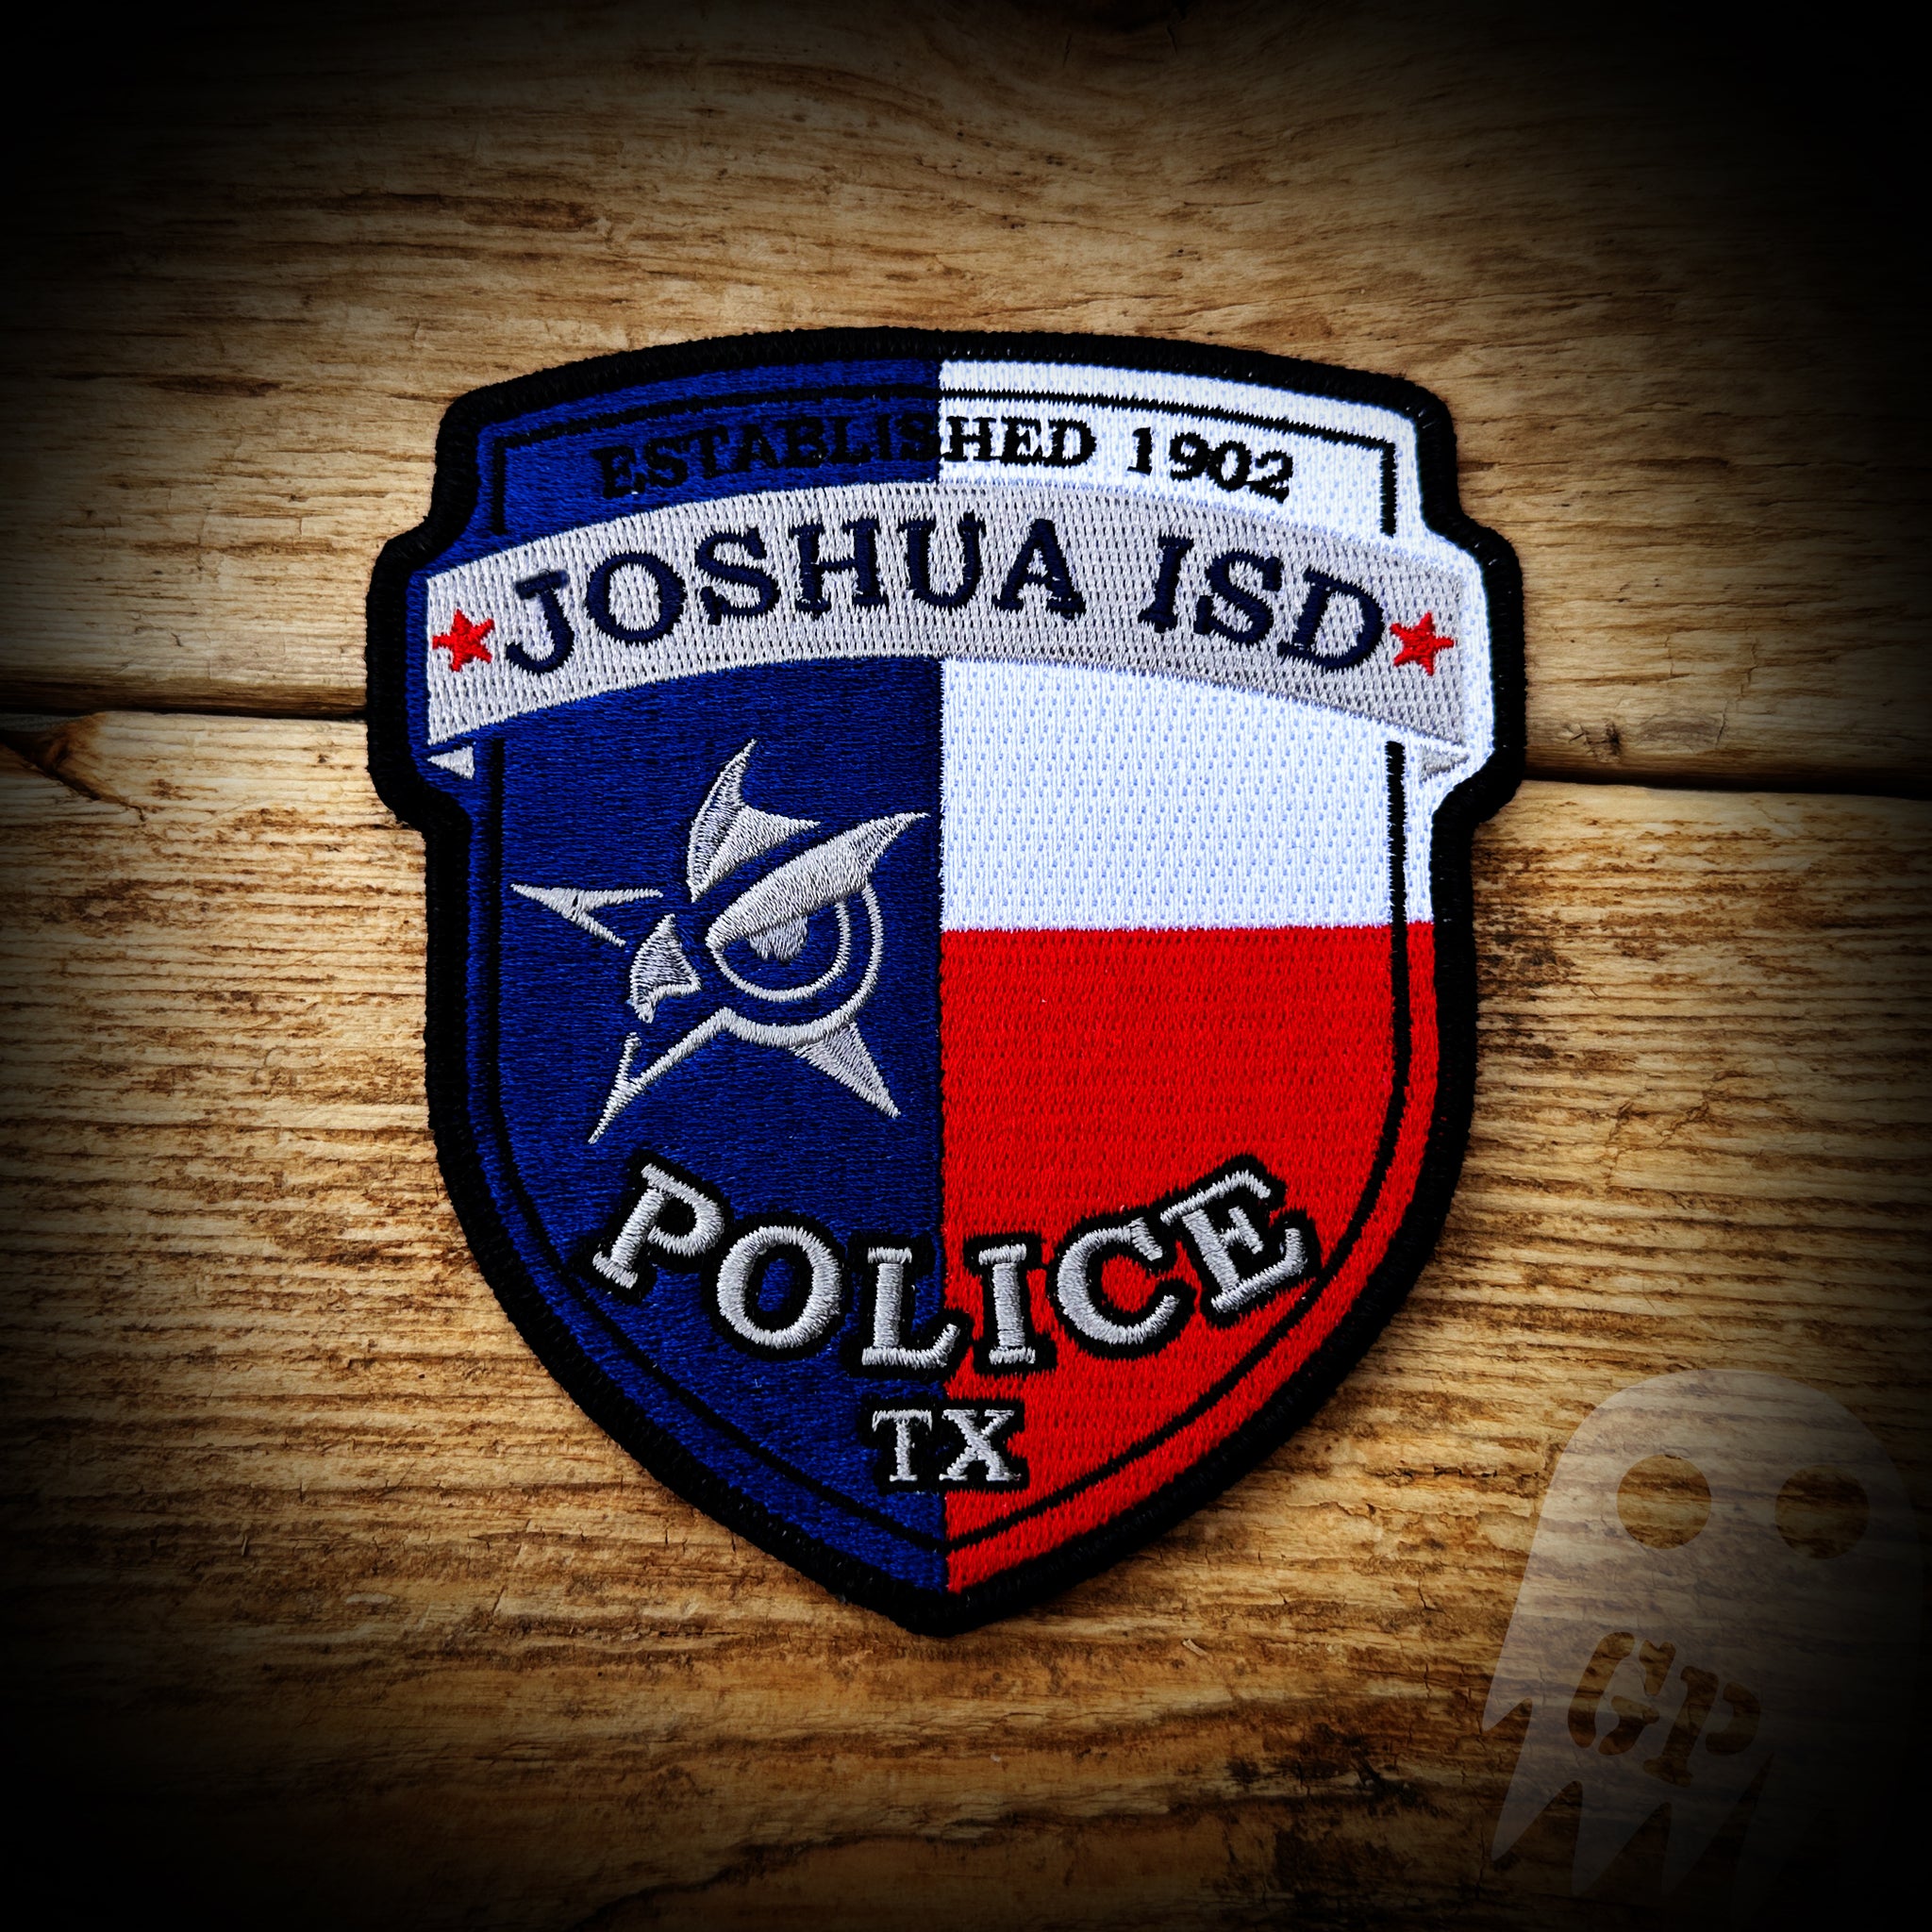 Joshua, TX ISD PD Patch - Authentic